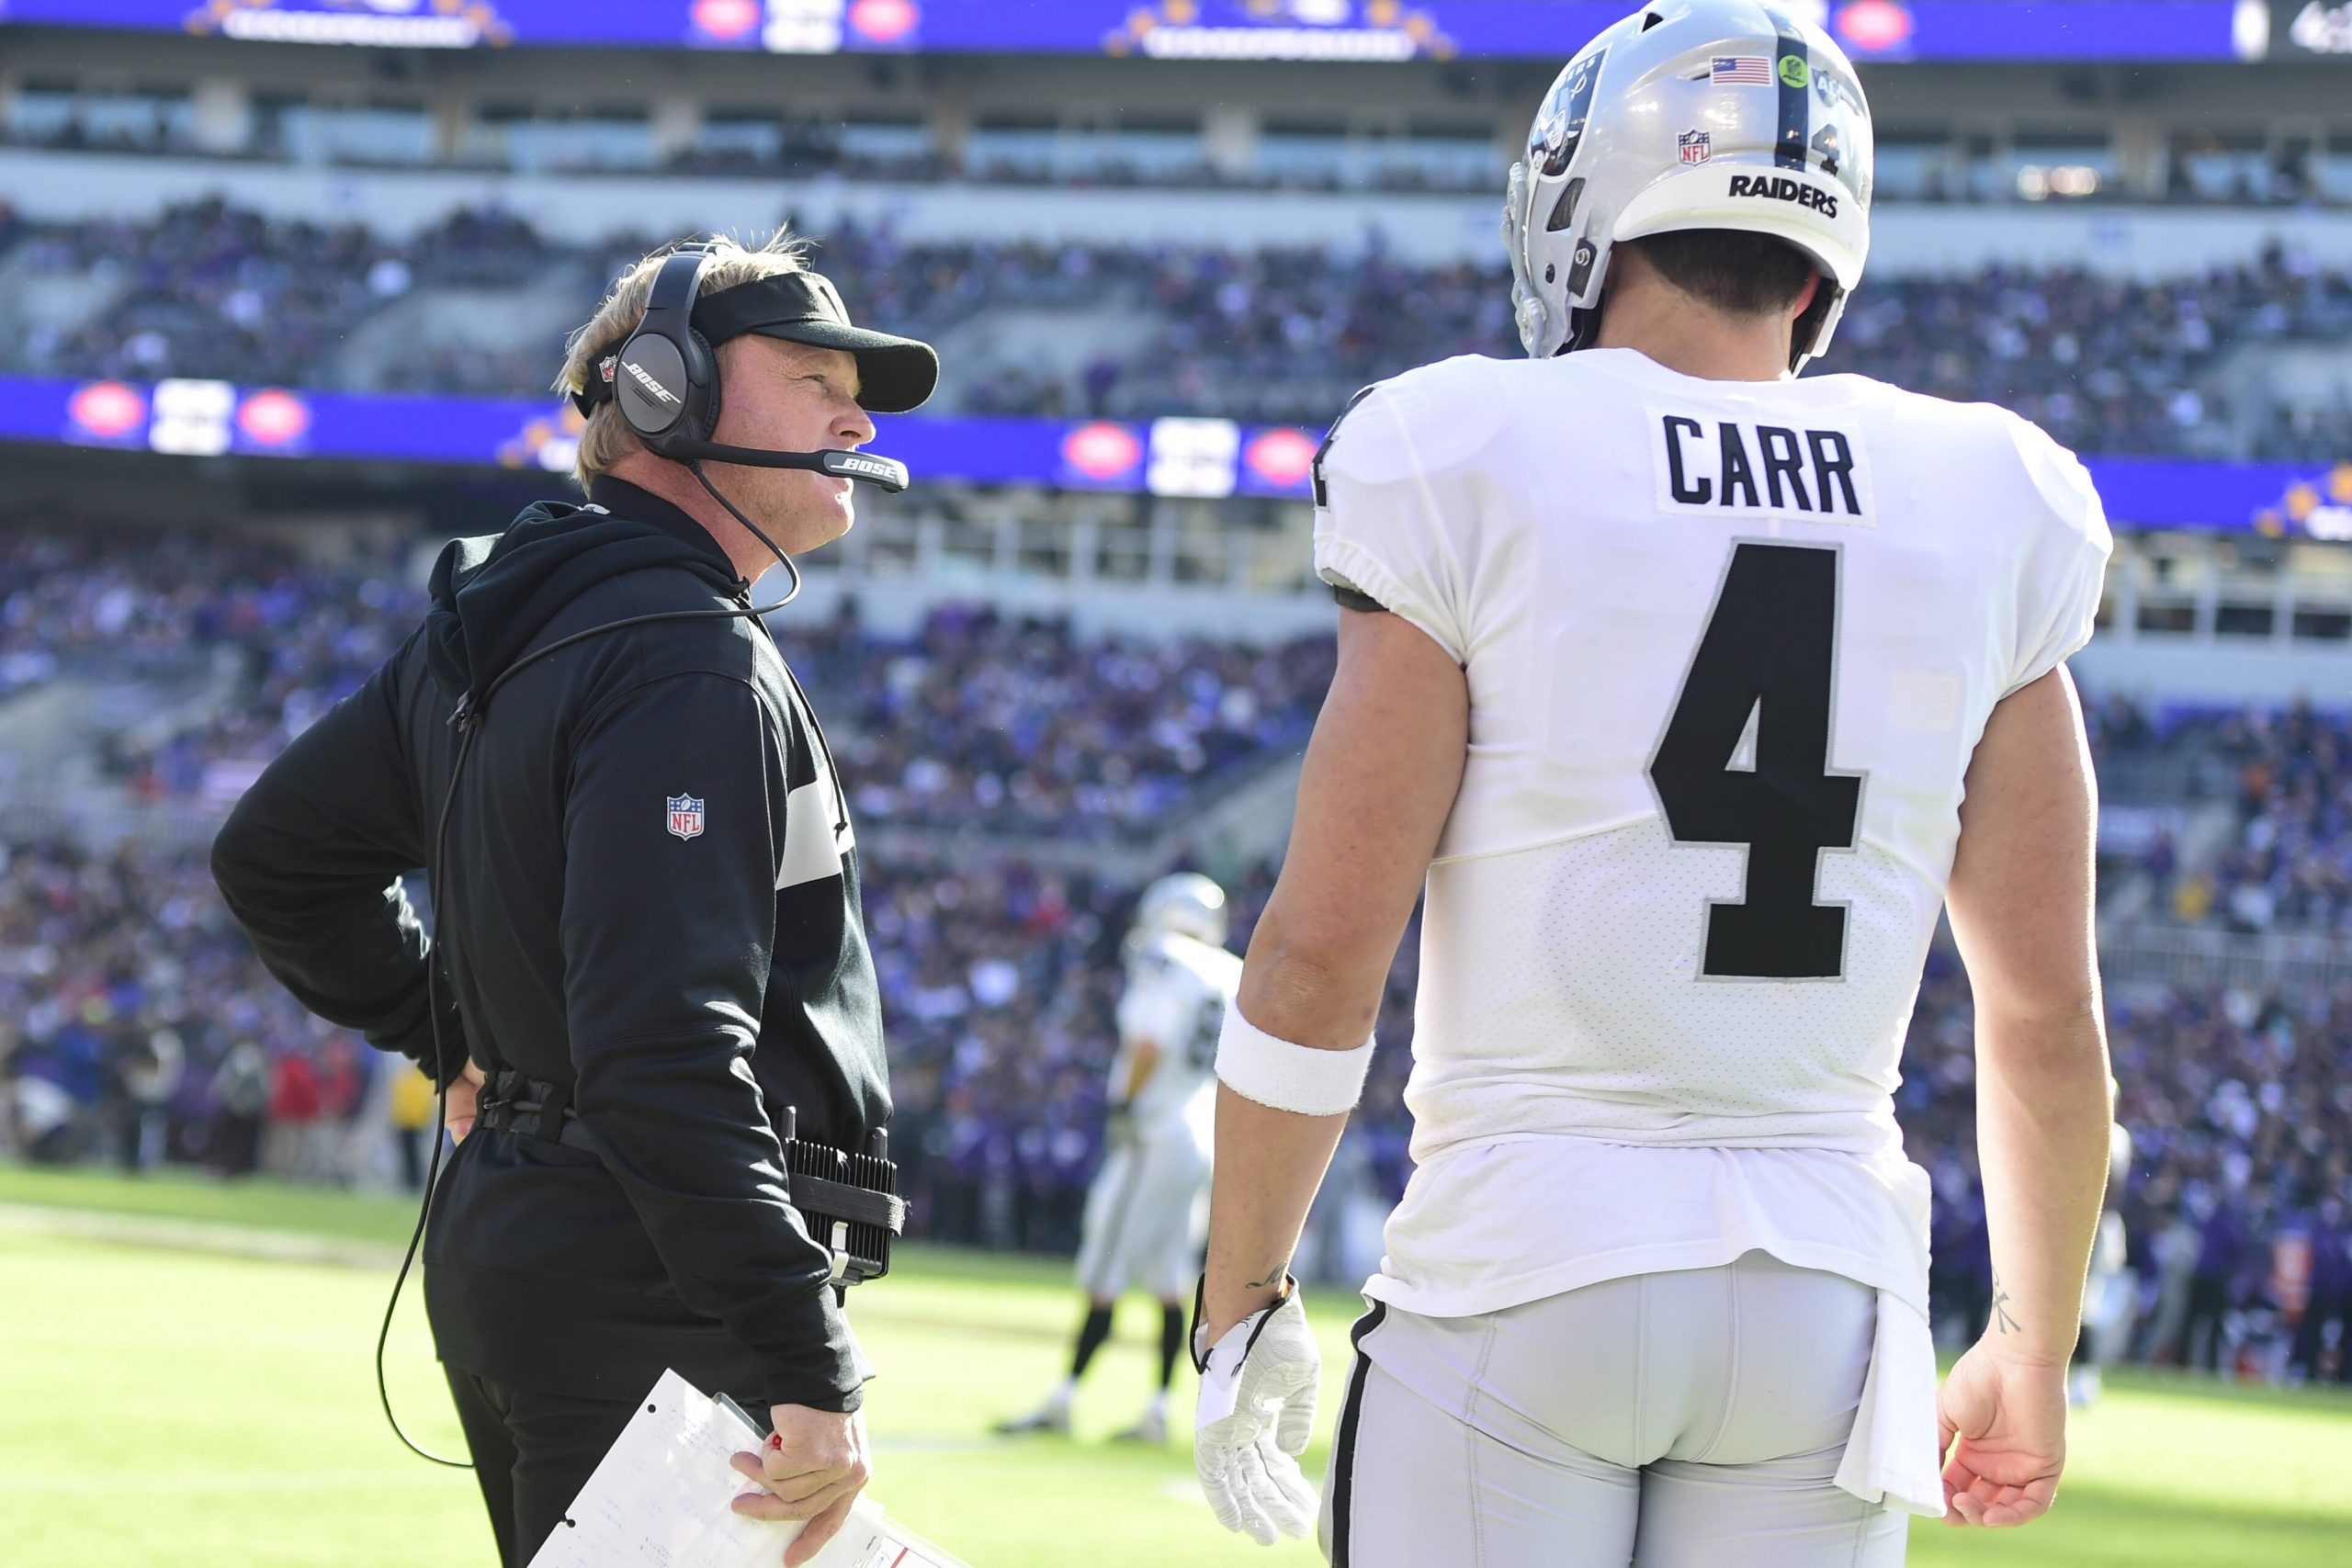 NFL, American Football Herren, USA Oakland Raiders at Baltimore Ravens, Nov 25, 2018 Baltimore, MD, USA Oakland Raiders head coach Jon Gruden speaks with quarterback Derek Carr 4 during the first quarter against the Baltimore Ravens at M&ampT Bank Stadium. Mandatory Credit: Tommy Gilligan-USA TODAY Sports, 25.11.2018 13:26:08, 11730630, NPStrans, Derek Carr, M&ampT Bank Stadium, Jon Gruden, NFL, Baltimore Ravens, Oakland Raiders PUBLICATIONxINxGERxSUIxAUTxONLY Copyright: xTommyxGilliganx 11730630